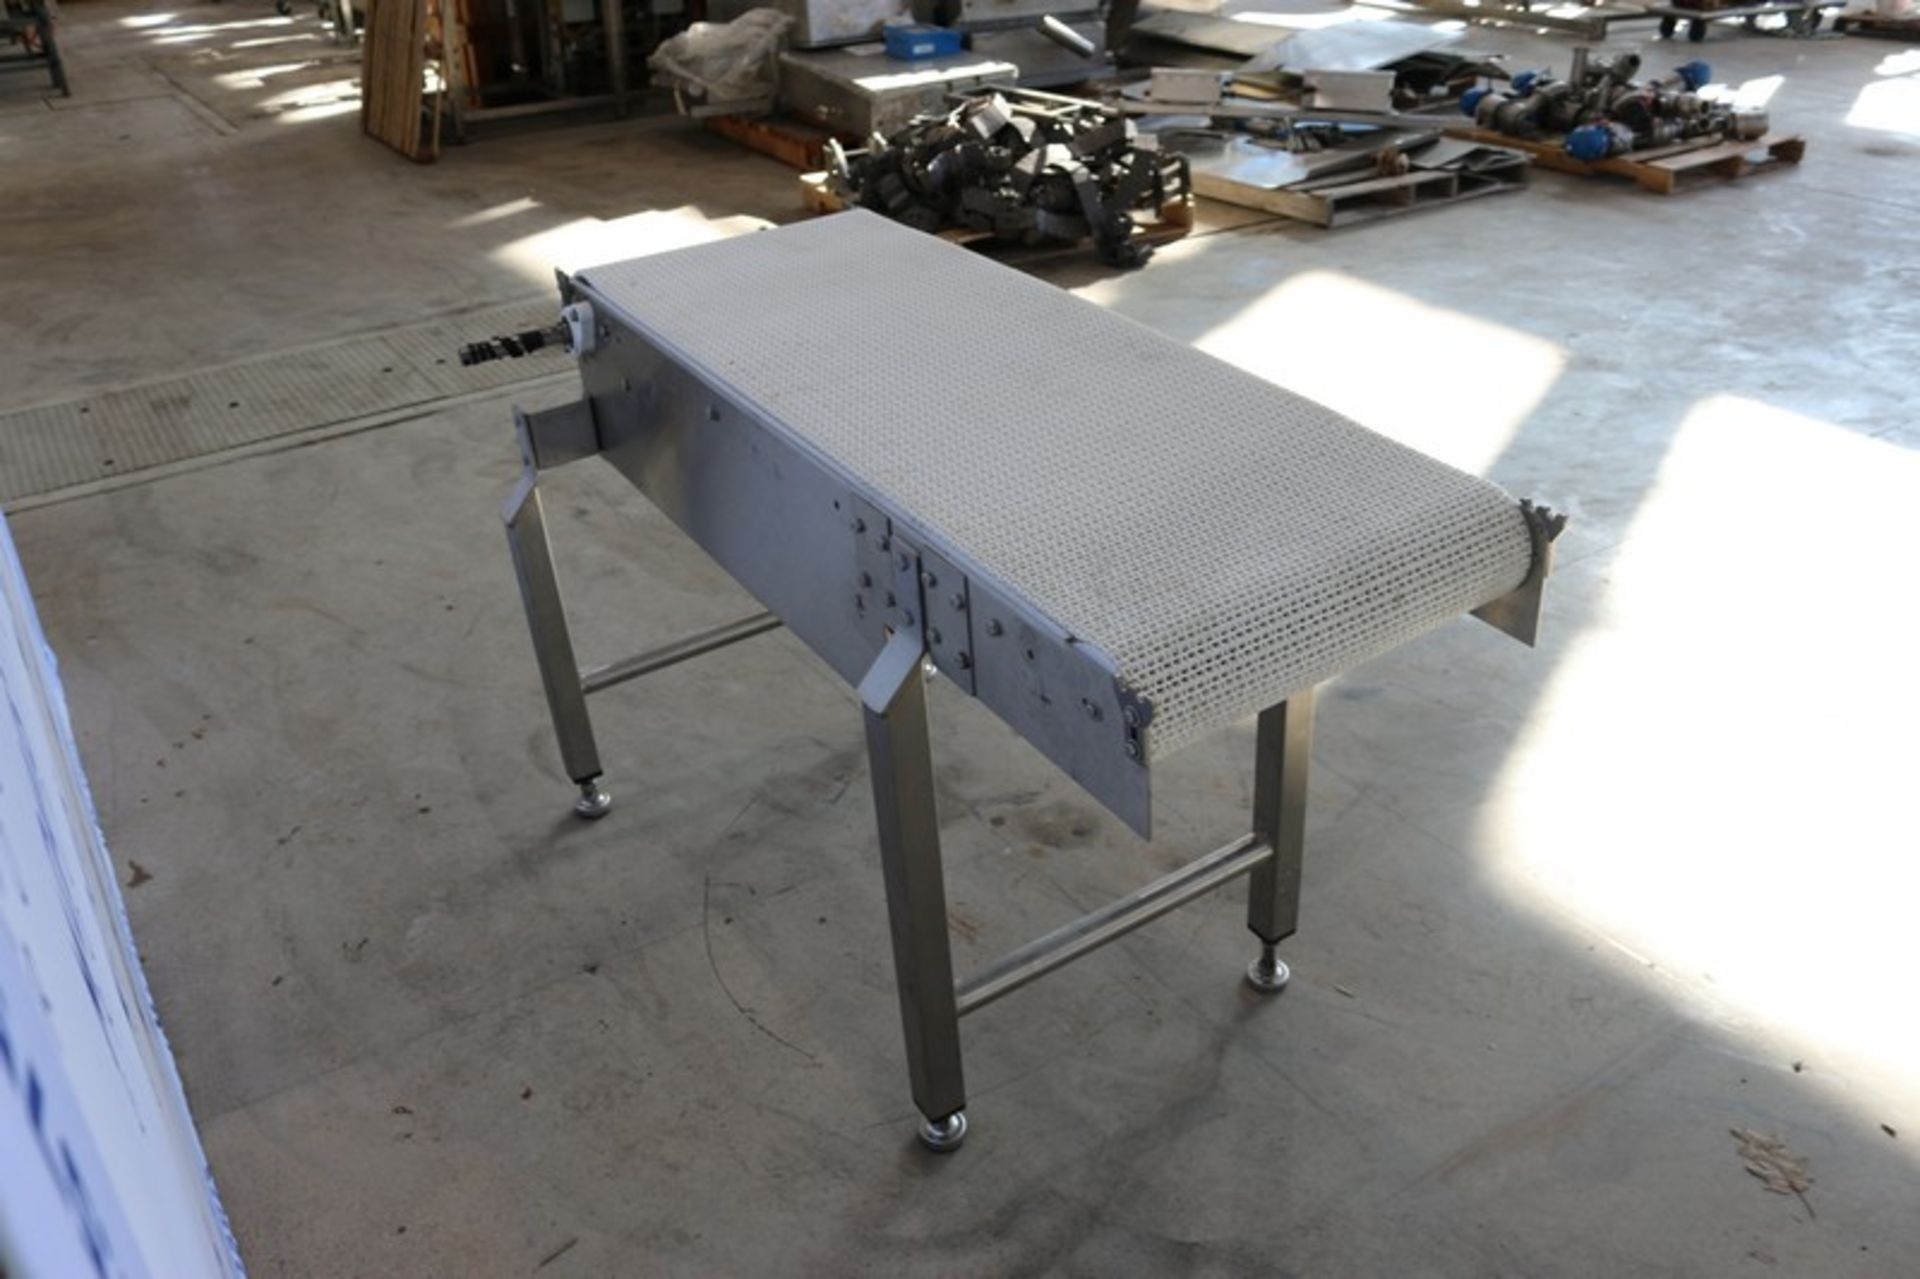 Straight Section of S/S Conveyor, with White Interlock Belt, Aprox. 55" L x 18" H Belt, Mounted on - Image 5 of 8